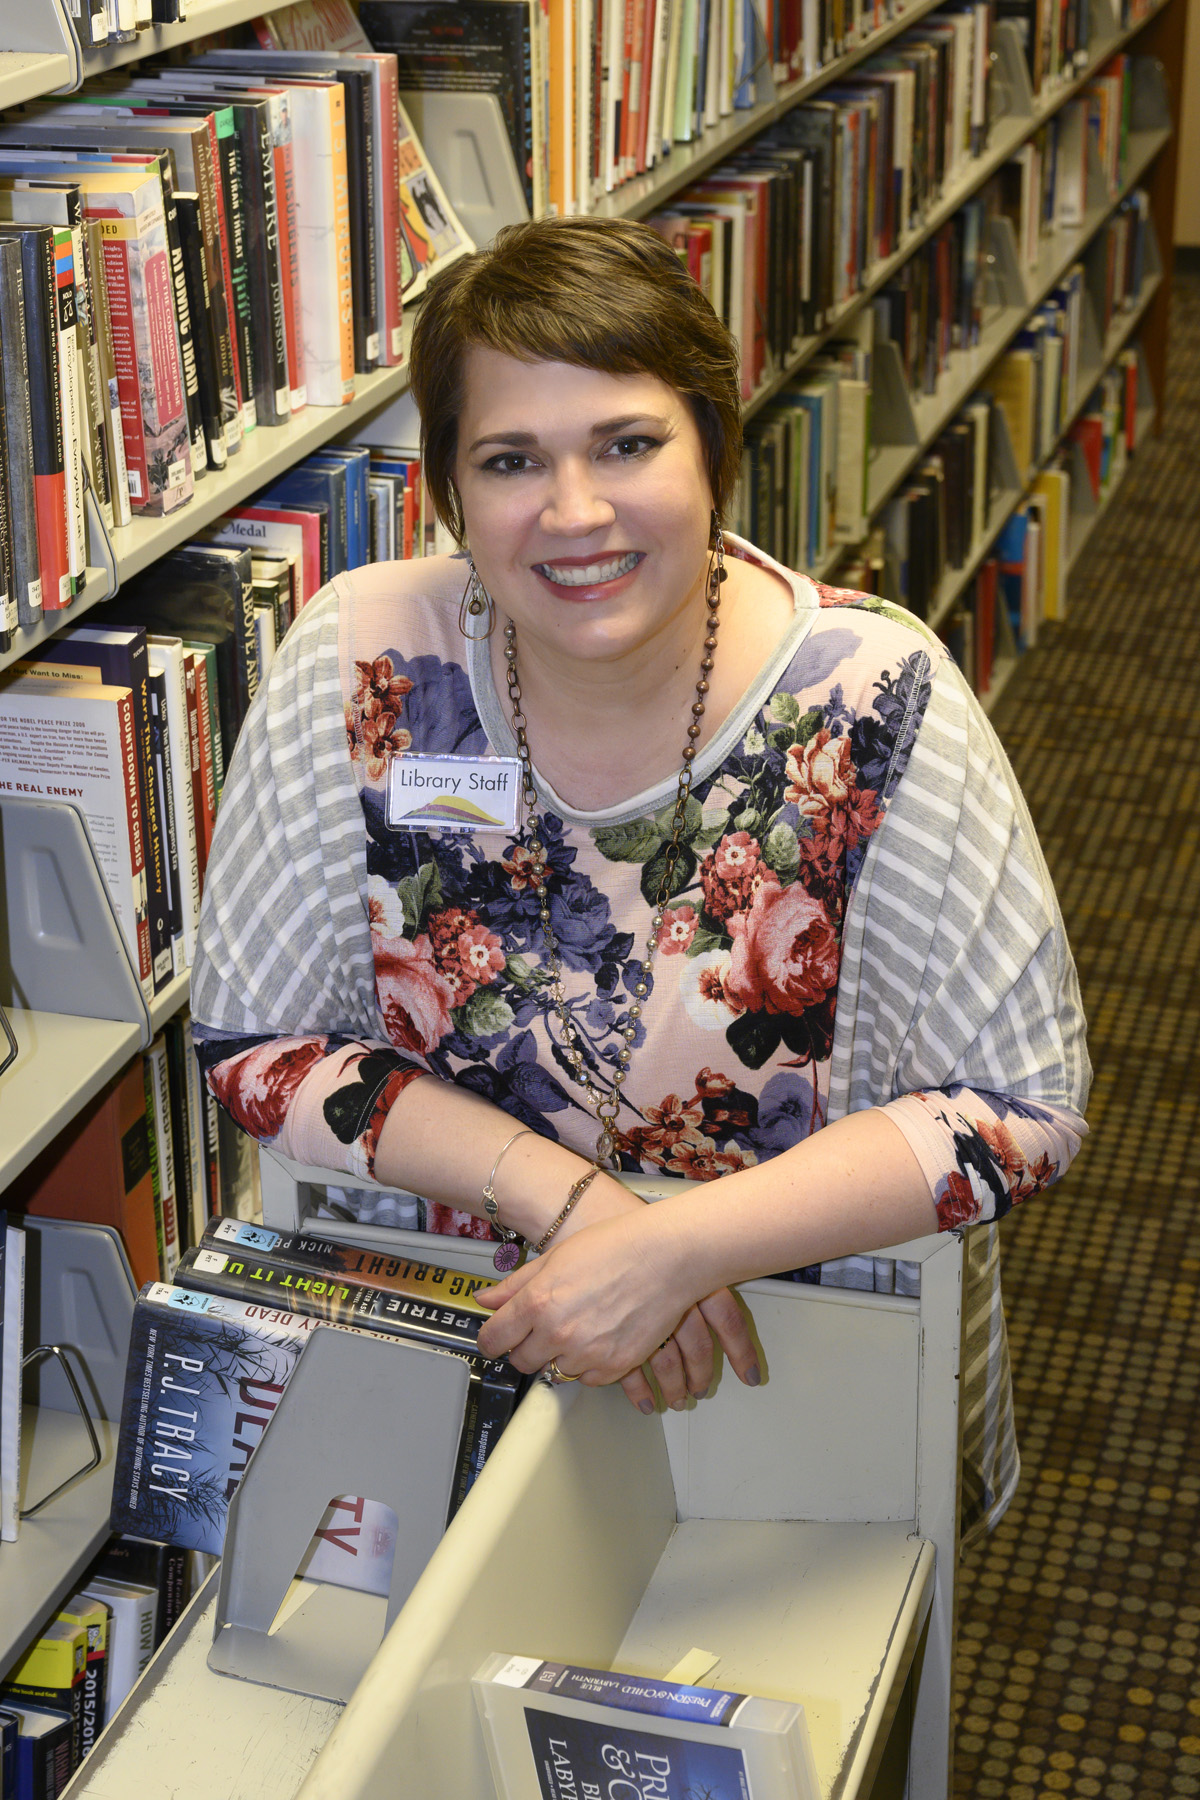 Lynn Engen with rolling book cart in the library.